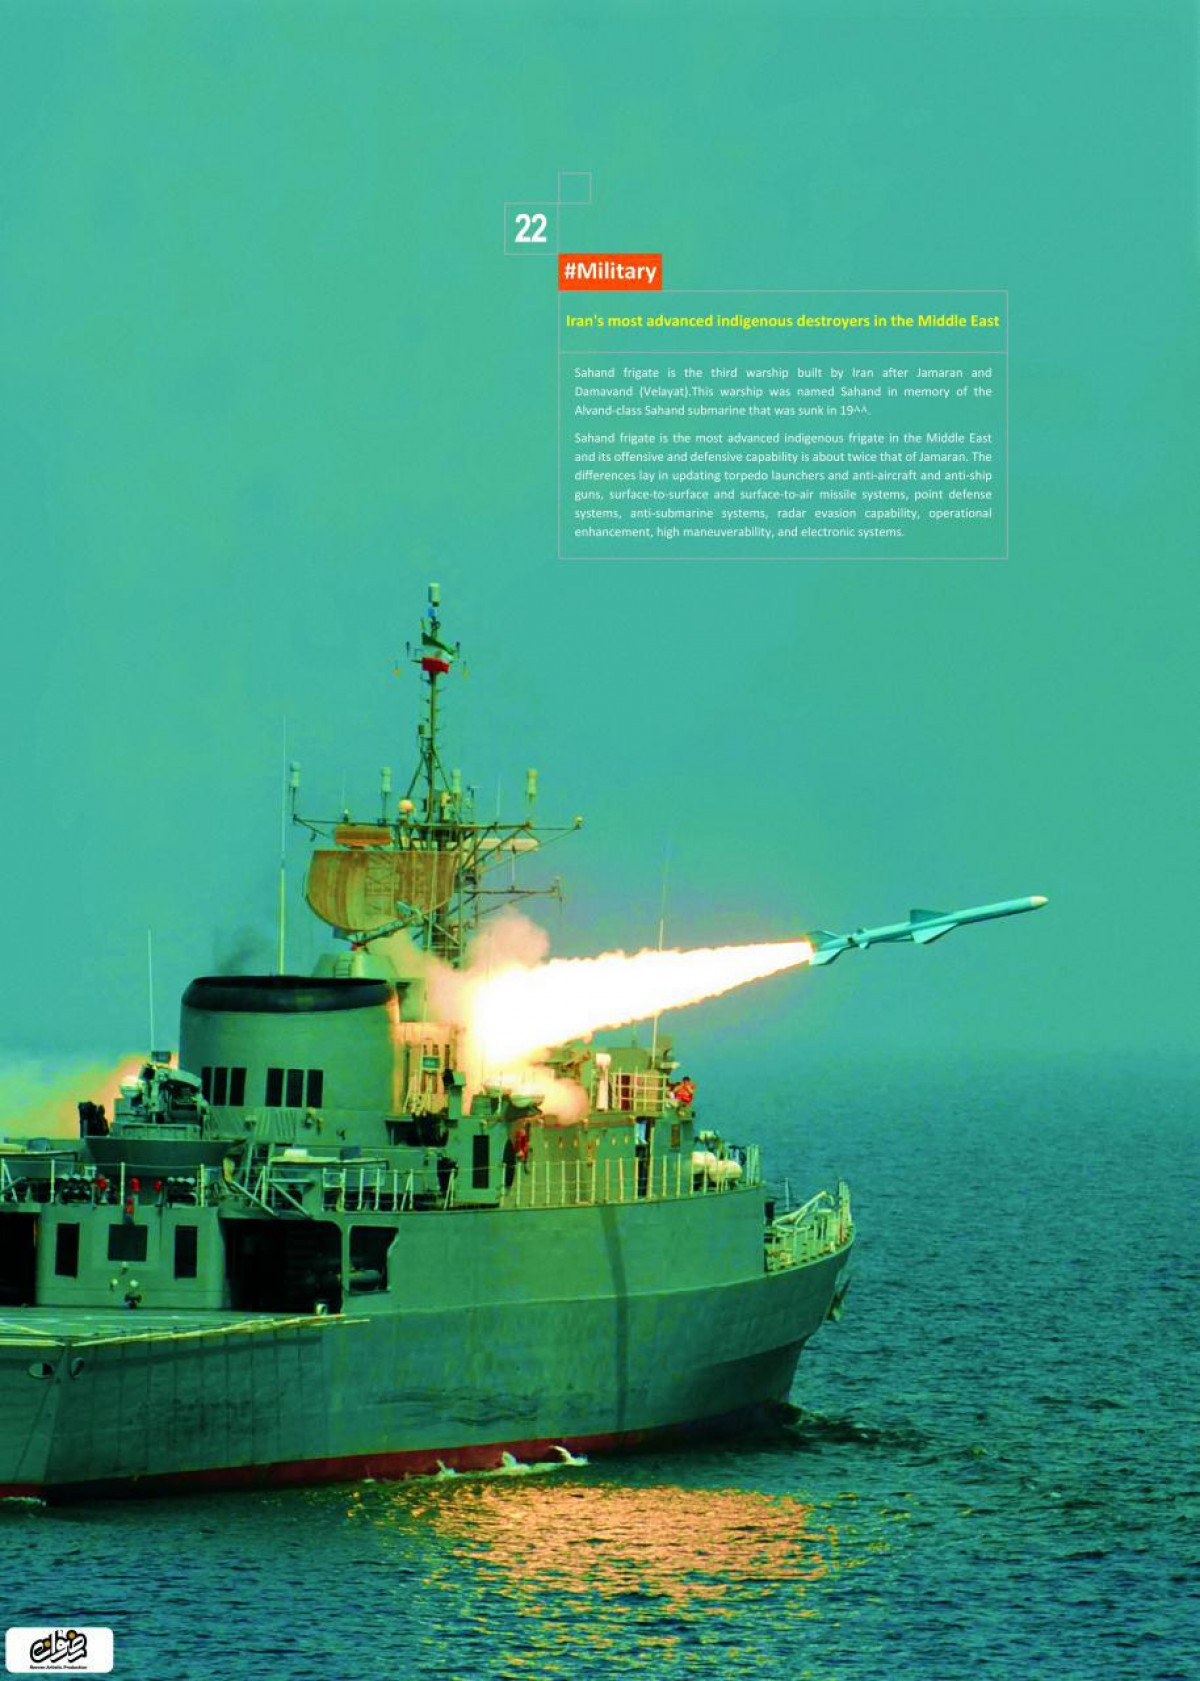 Iran's most advanced indigenous destroyers in the Middle East